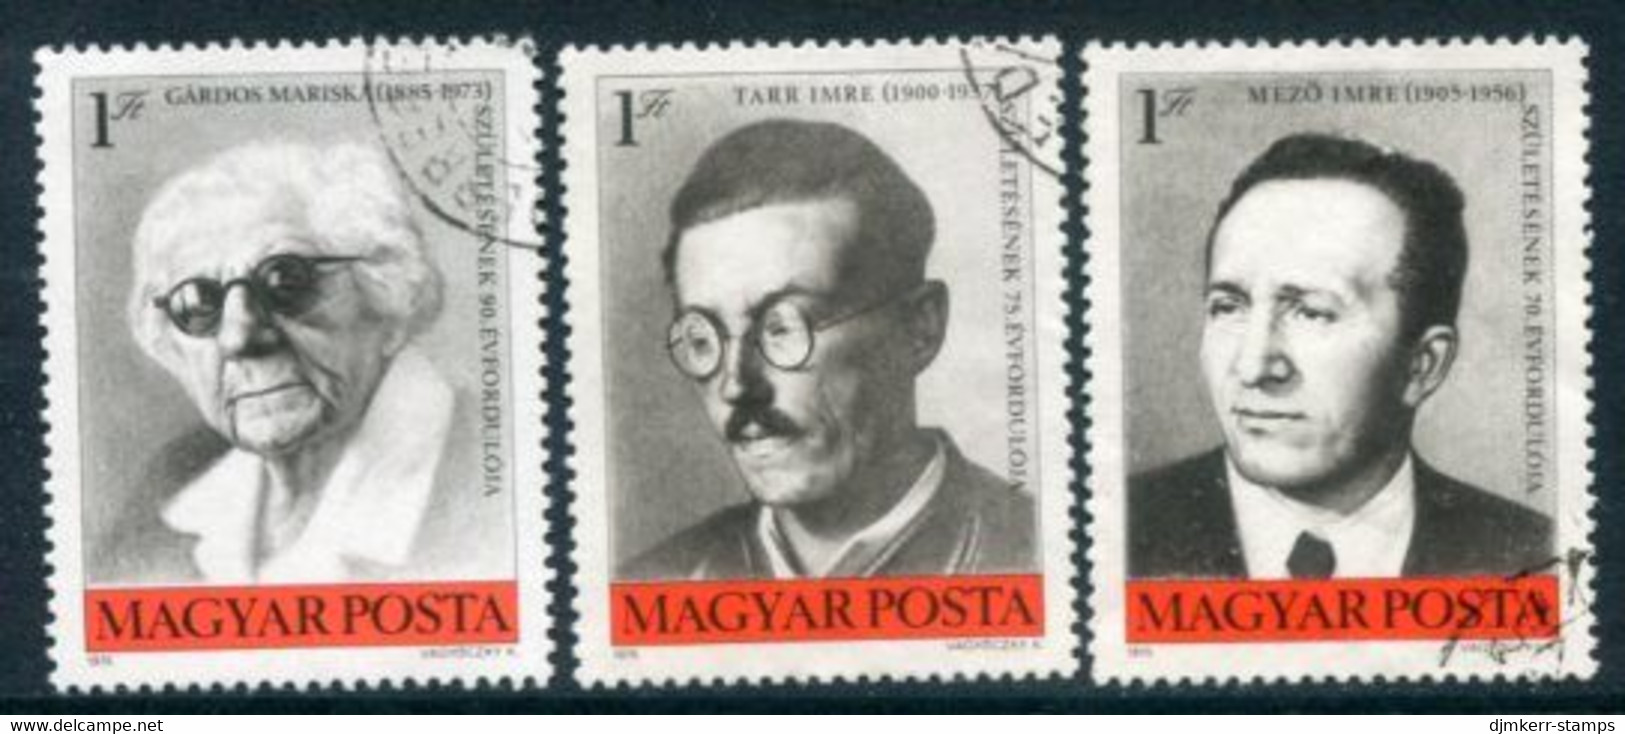 HUNGARY 1975 Famous Hungarians Used.  Michel 3077-79 - Used Stamps